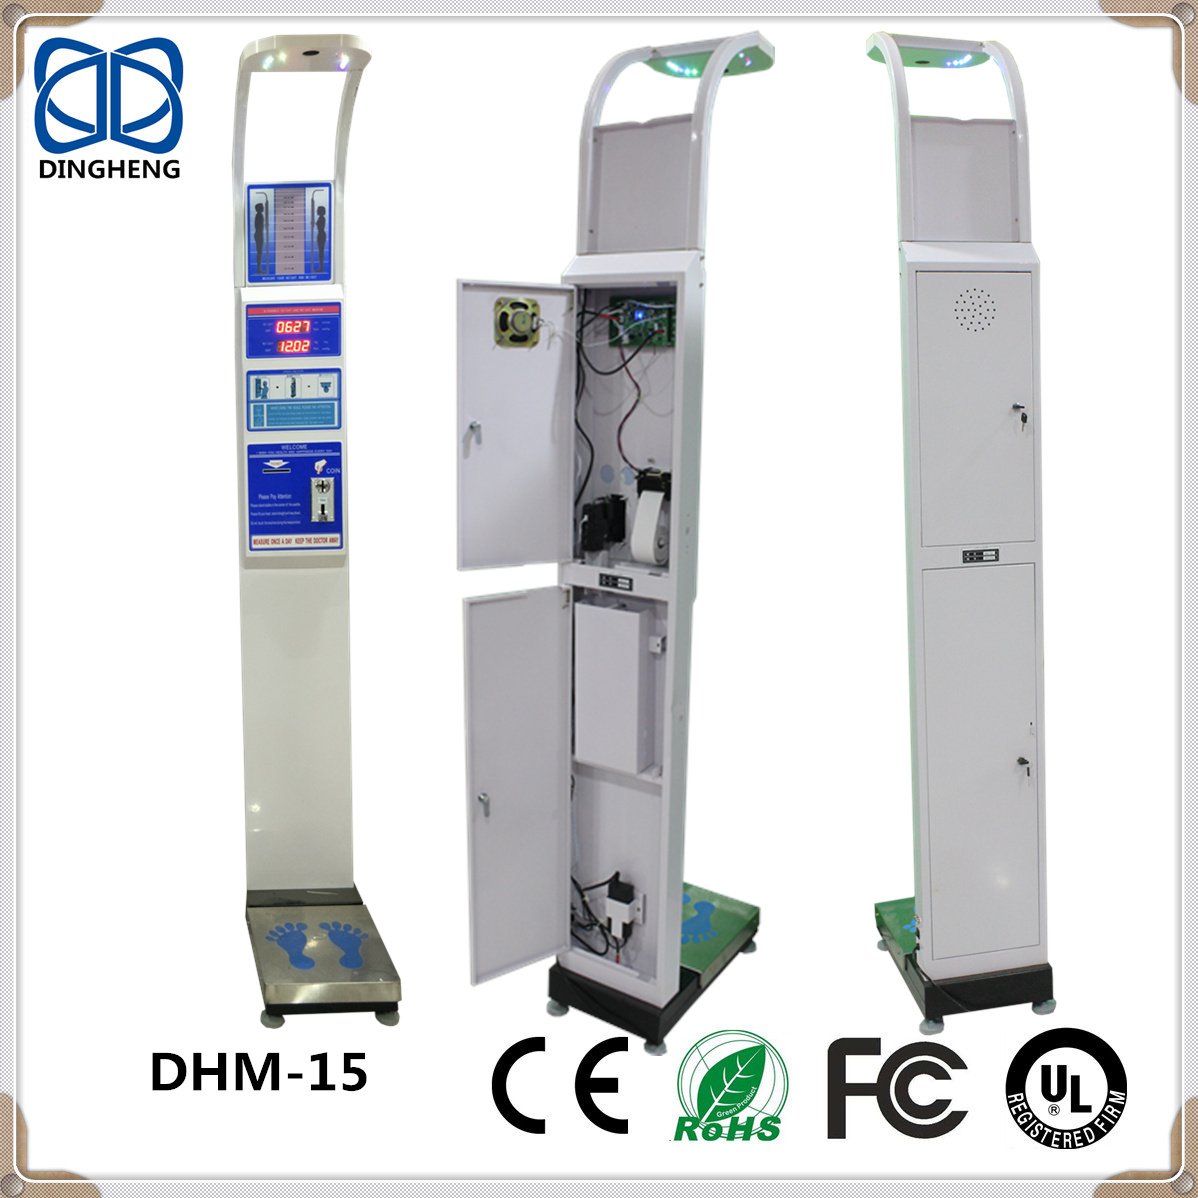 DHM-15 Digital Body Fat Analyzer eletronic weight weighing Scale with BMI function supply